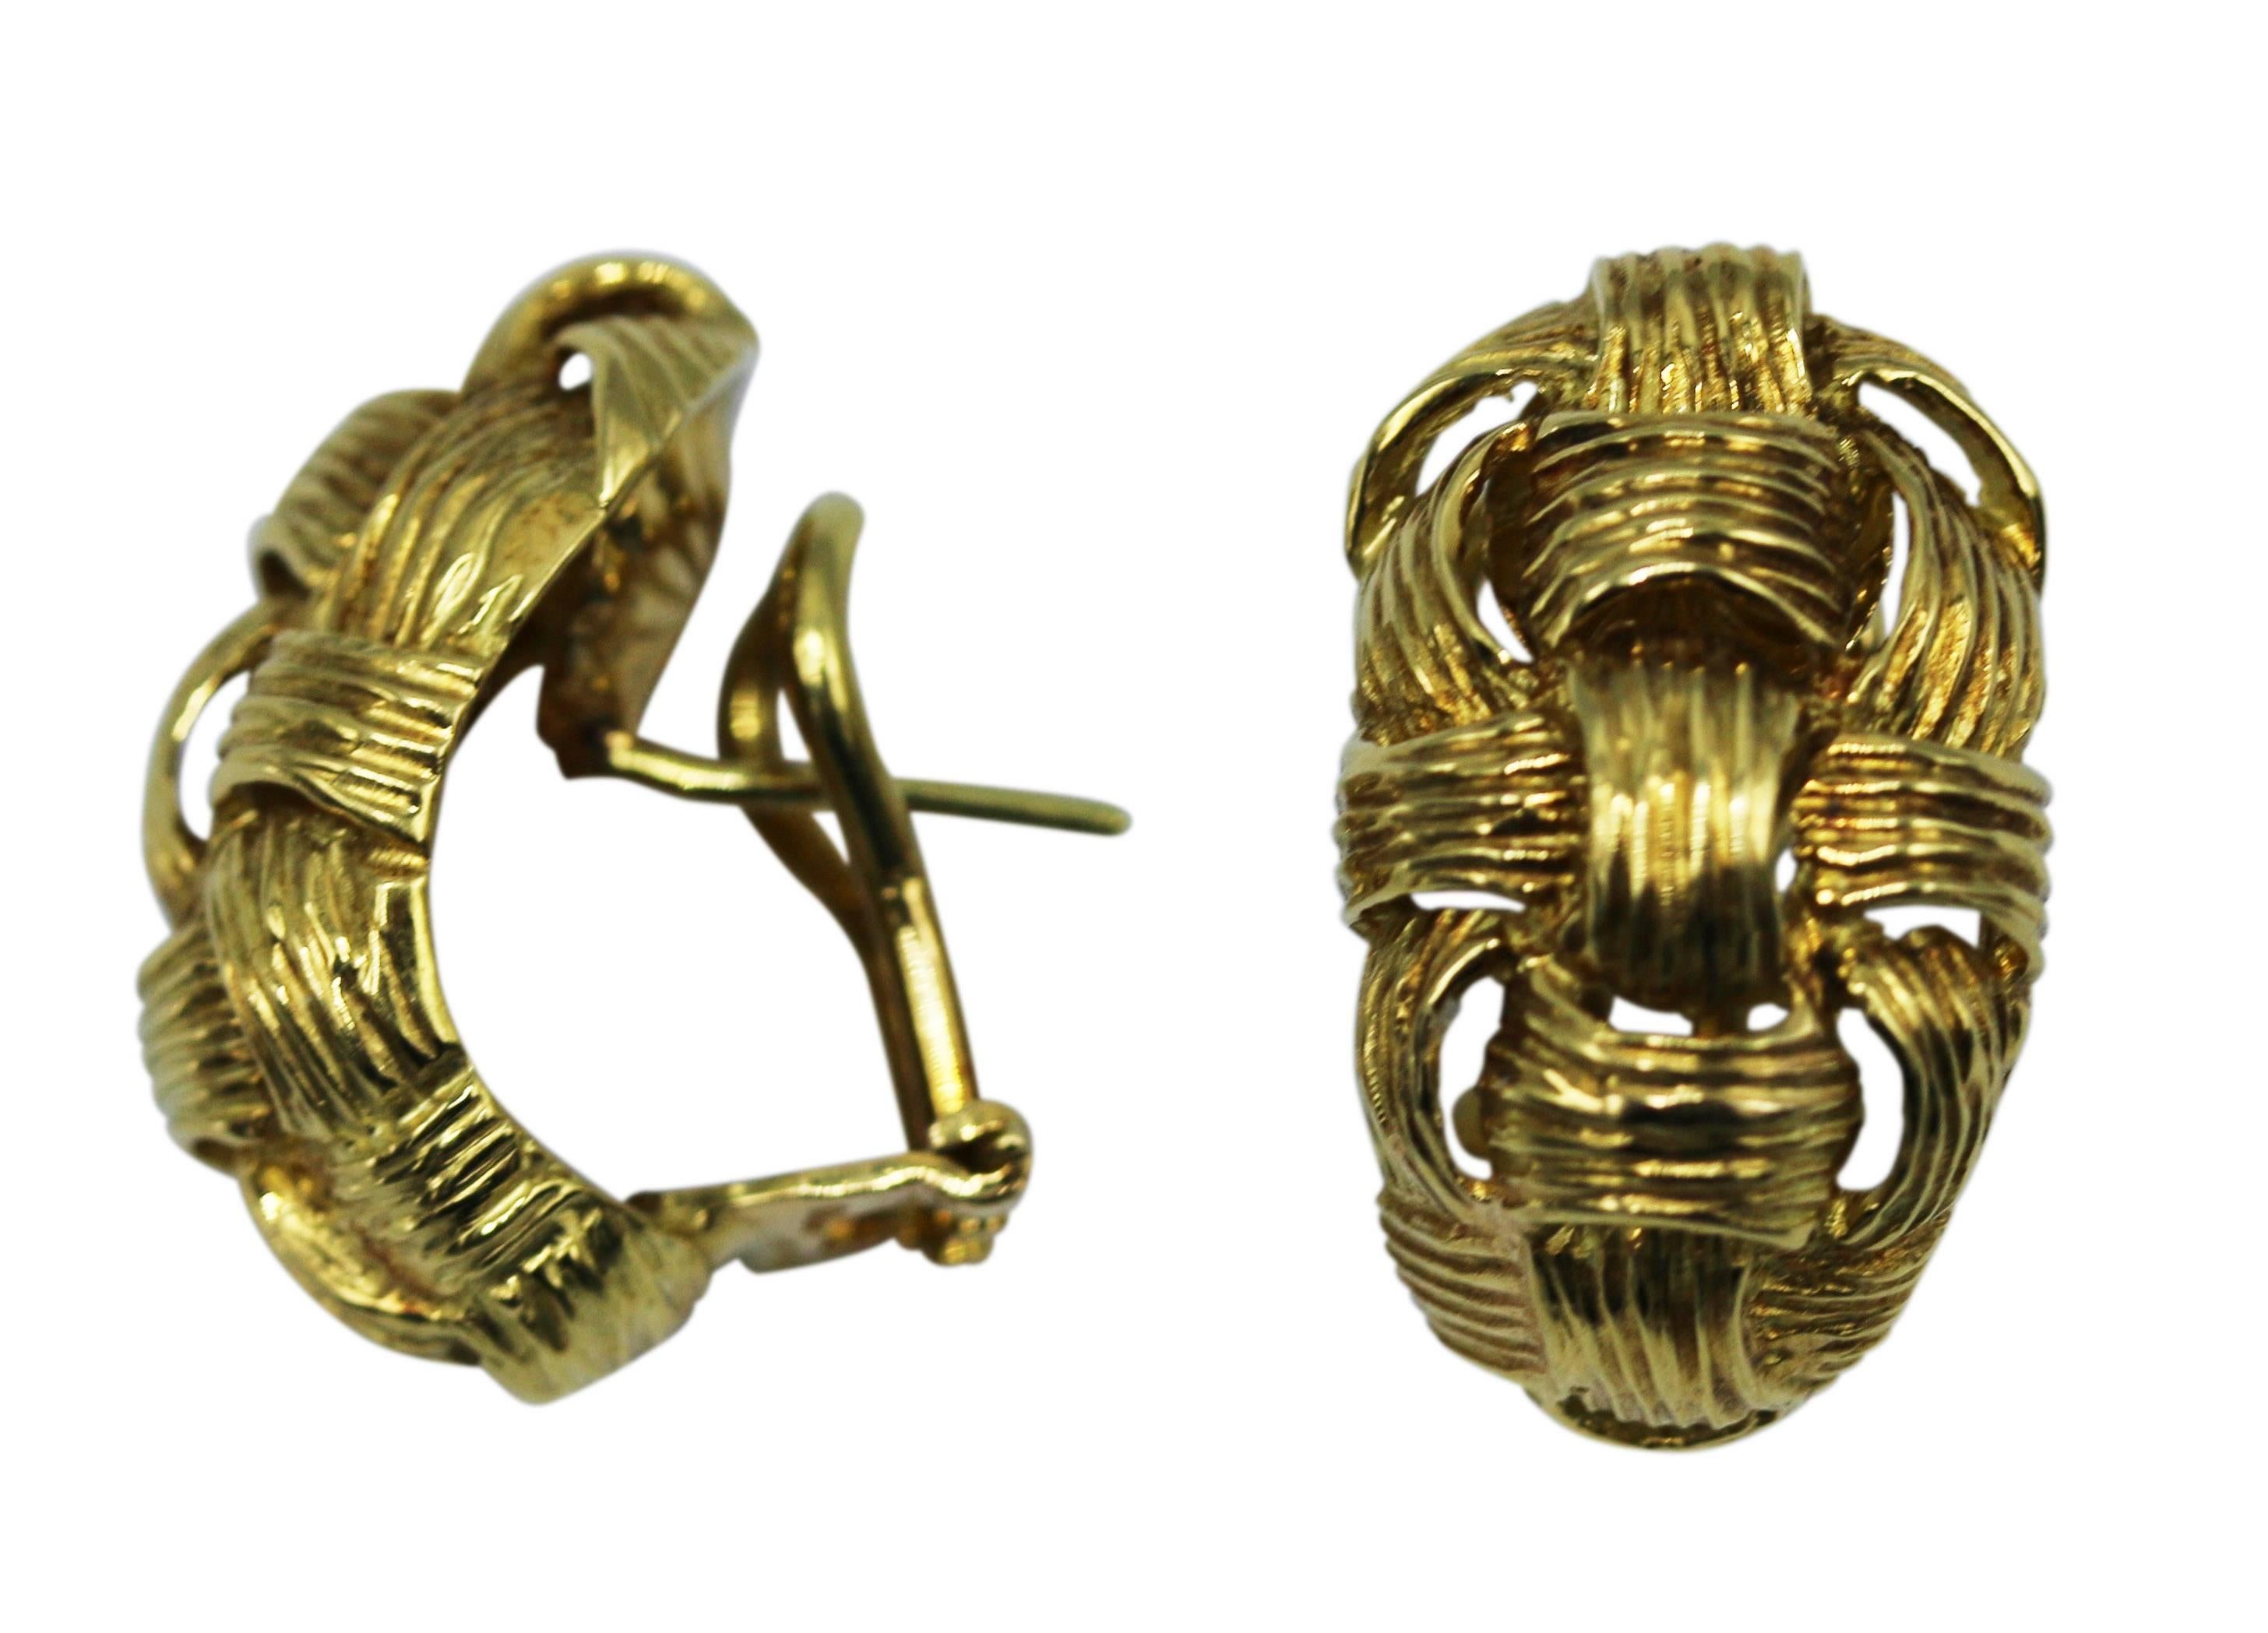 Pair of 18 karat yellow gold basketweave earclips, circa 1970, of half hoop-shape with a textured gold basketweave texture, gross weight 11.6 grams, measuring 1 by 5/8 inch, with Italian gold marks. A great pair of everyday earclips of unique design